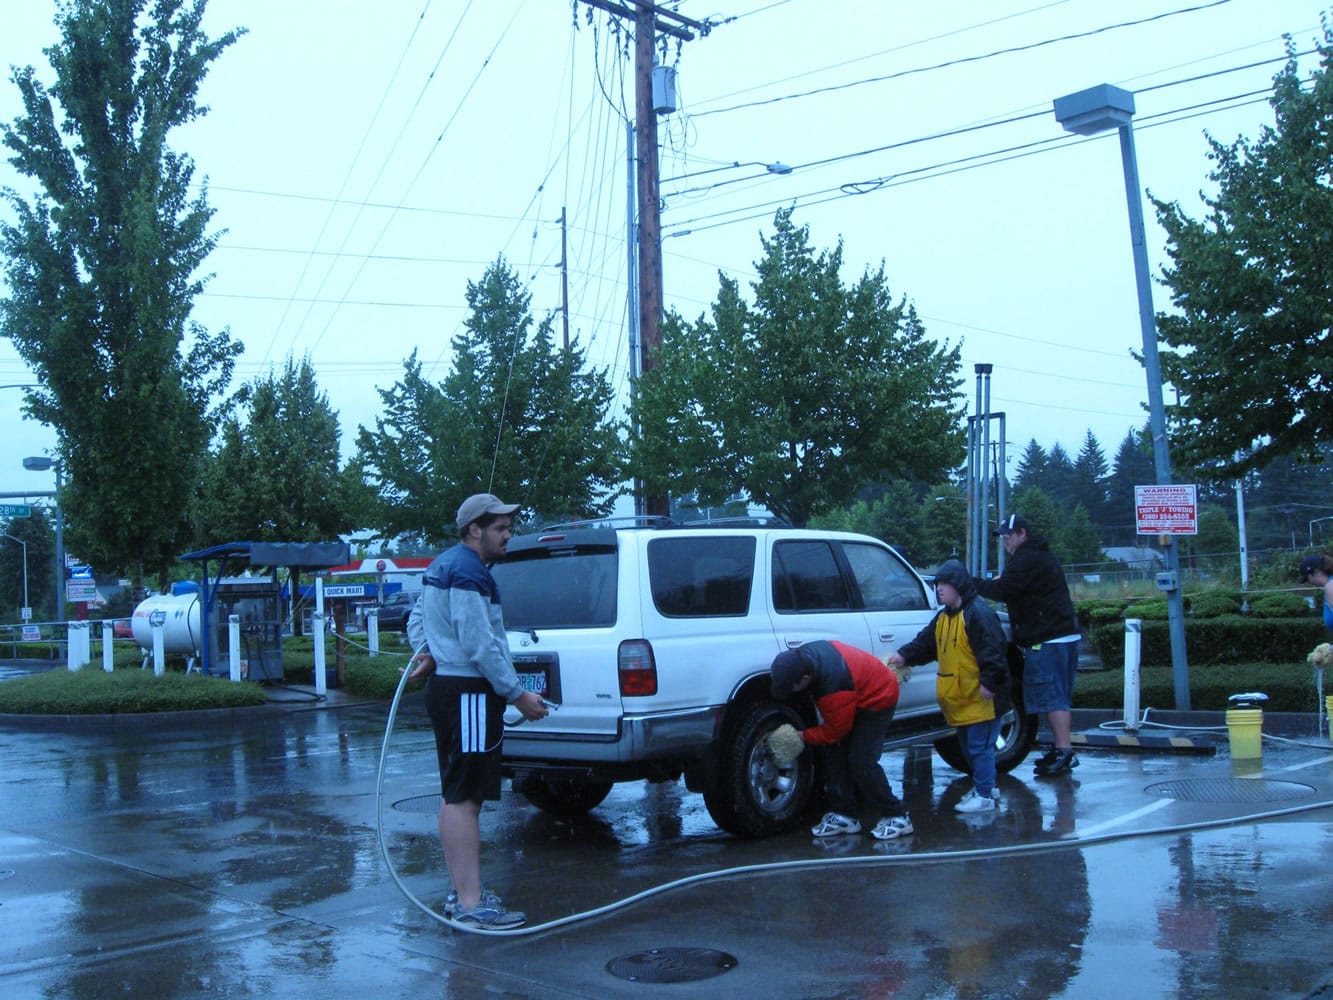 Clark County Special Olympics held a car wash to raise money to purchase jerseys for two new softball teams.